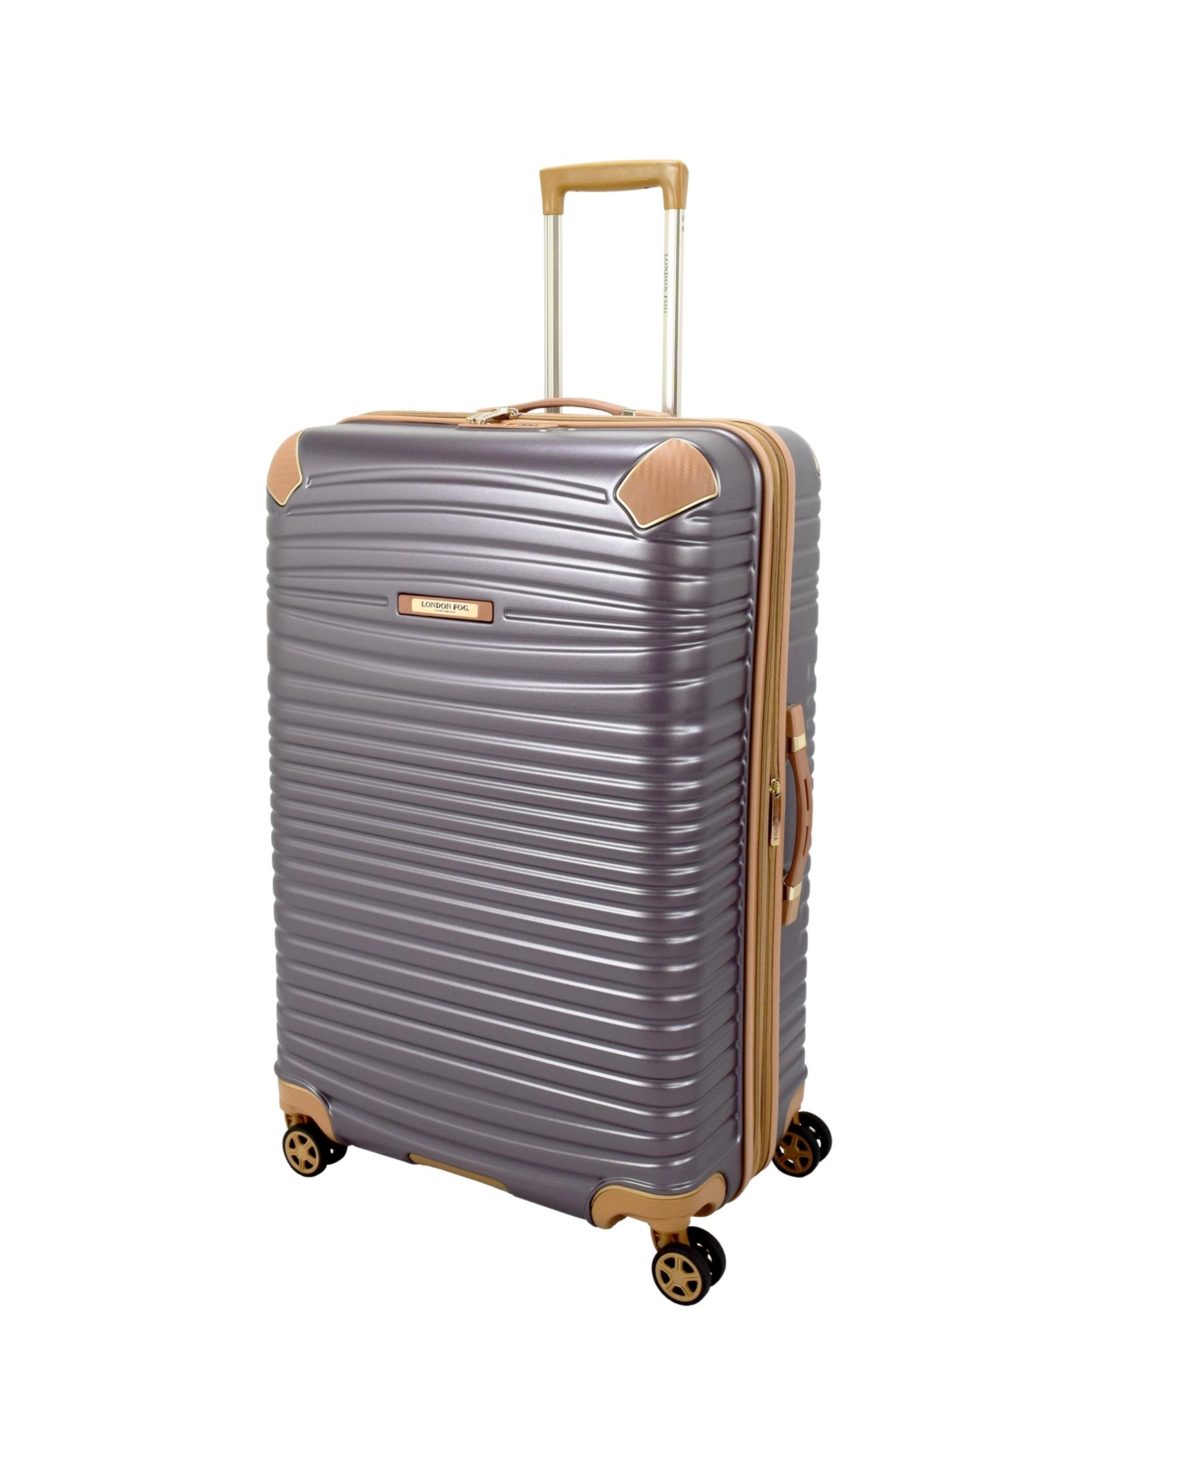 Closeout! London Fog Chelsea 29" Hardside Spinner Suitcase - Lilac